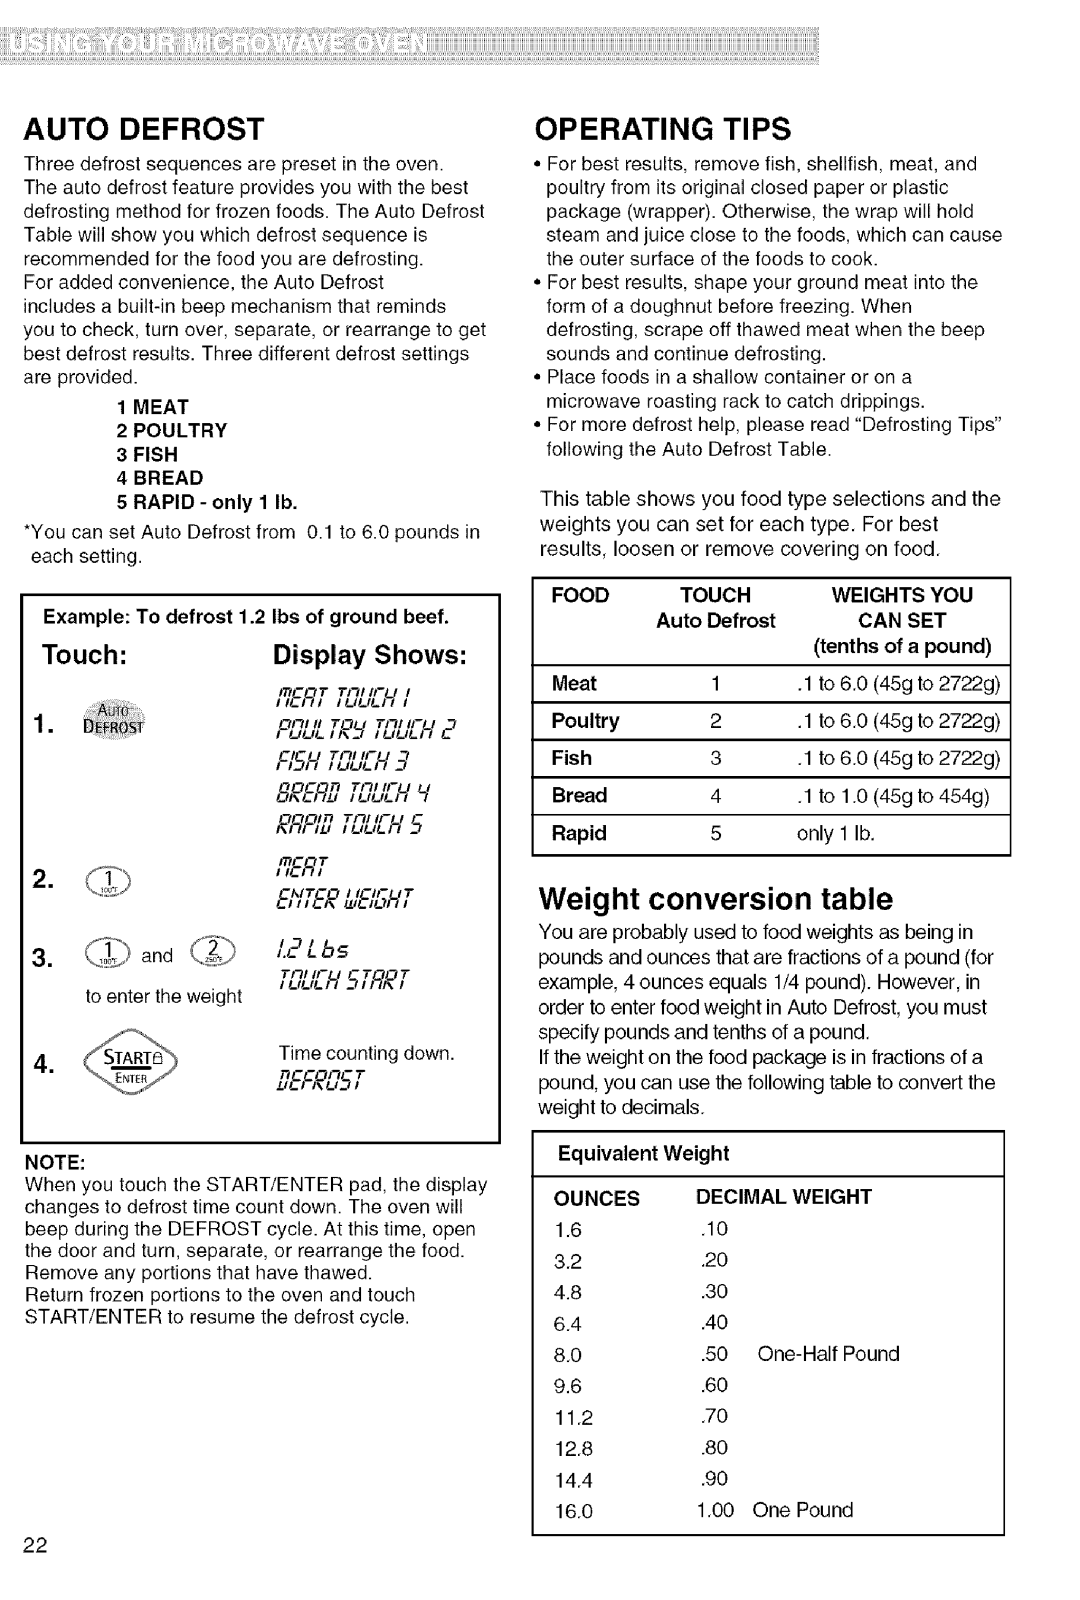 Kenmore 721.80822 Weight conversion table, Auto Defrost, Operating Tips, Display Shows, _&qTT, 81&.CRfl 7U, -,£, flE-RT 